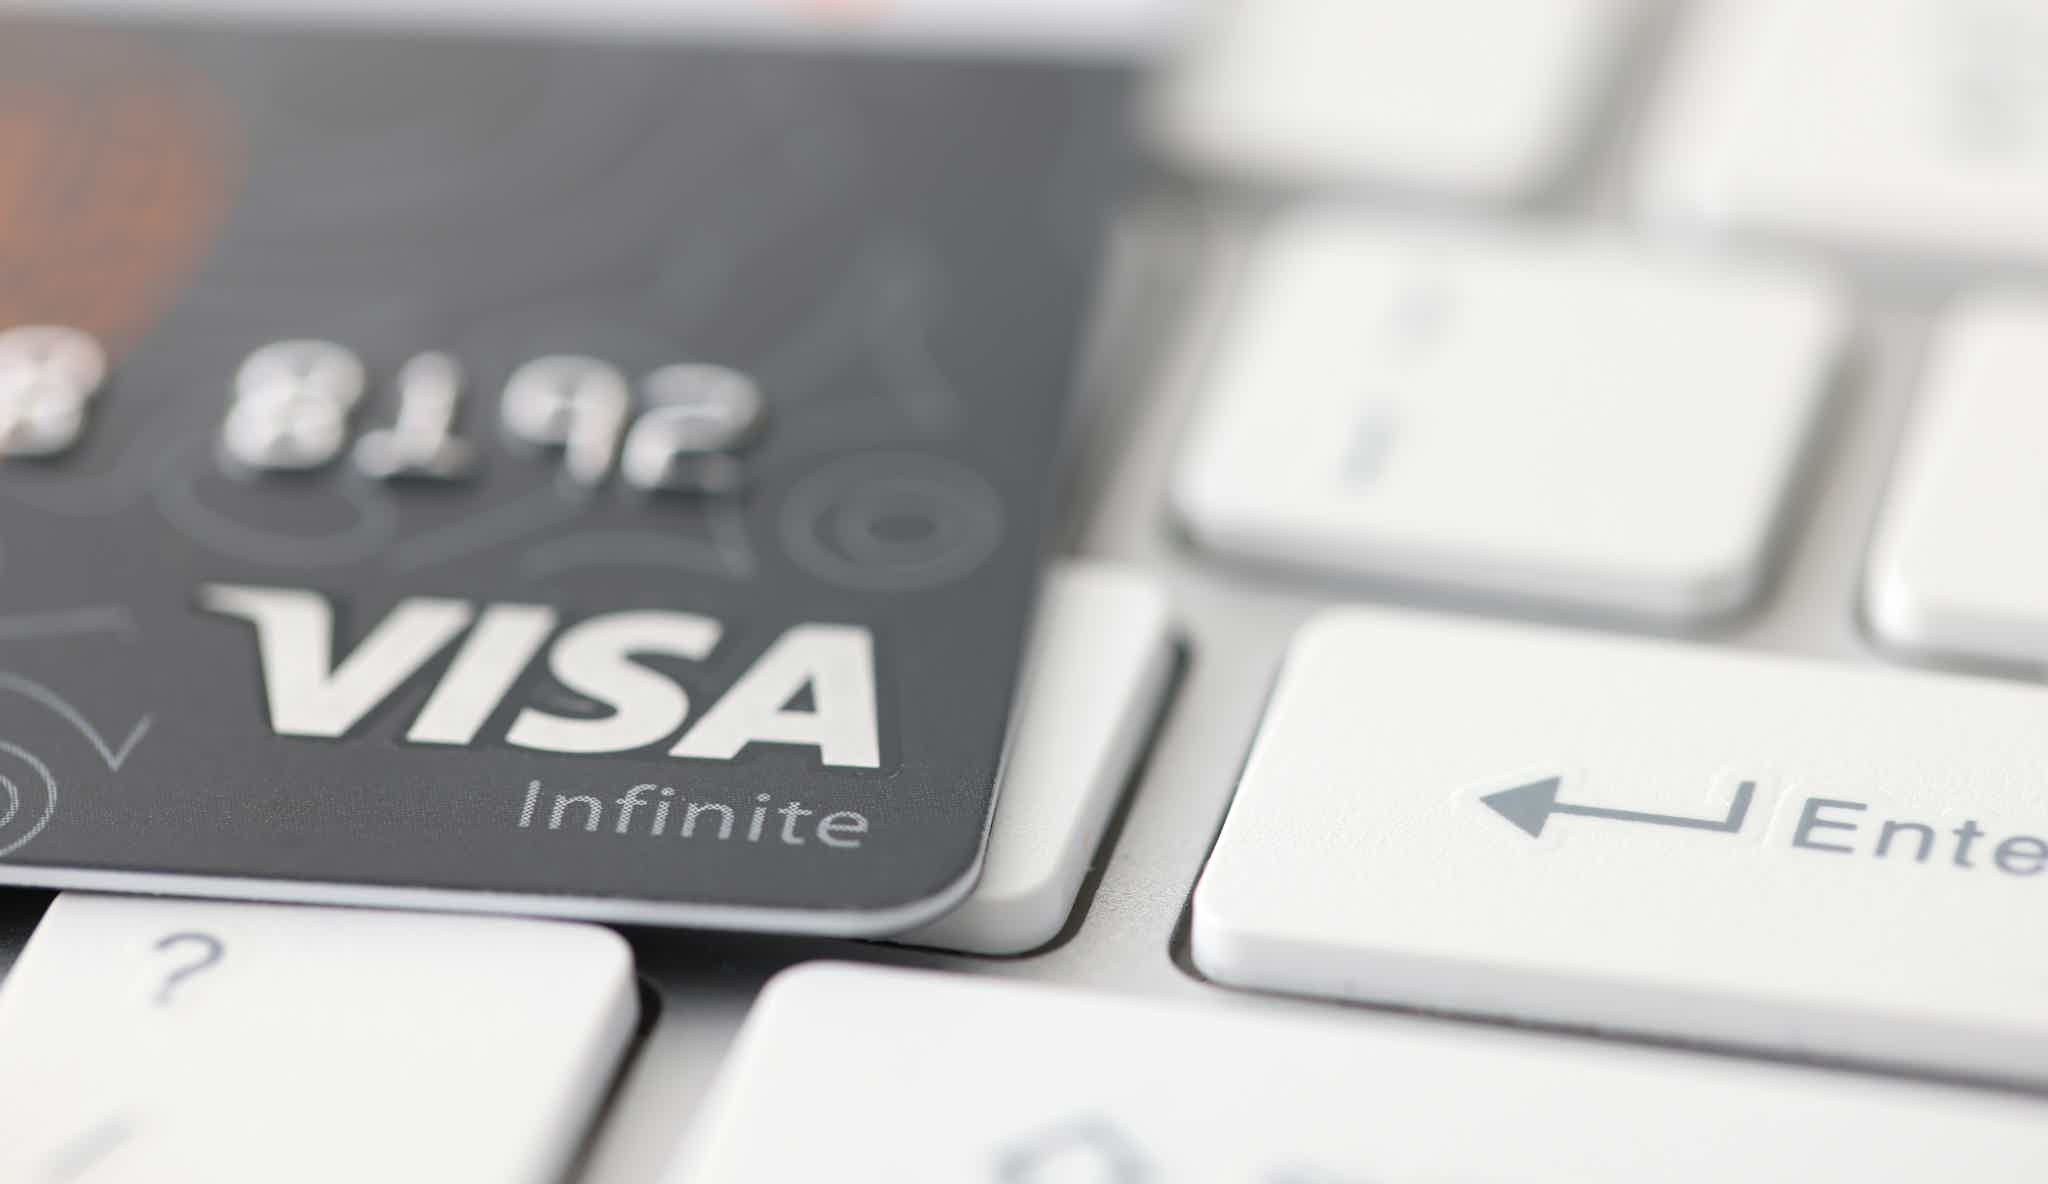 Find out the difference between Visa Infinite and other Visa credit cards. Source: Adobe Stock.